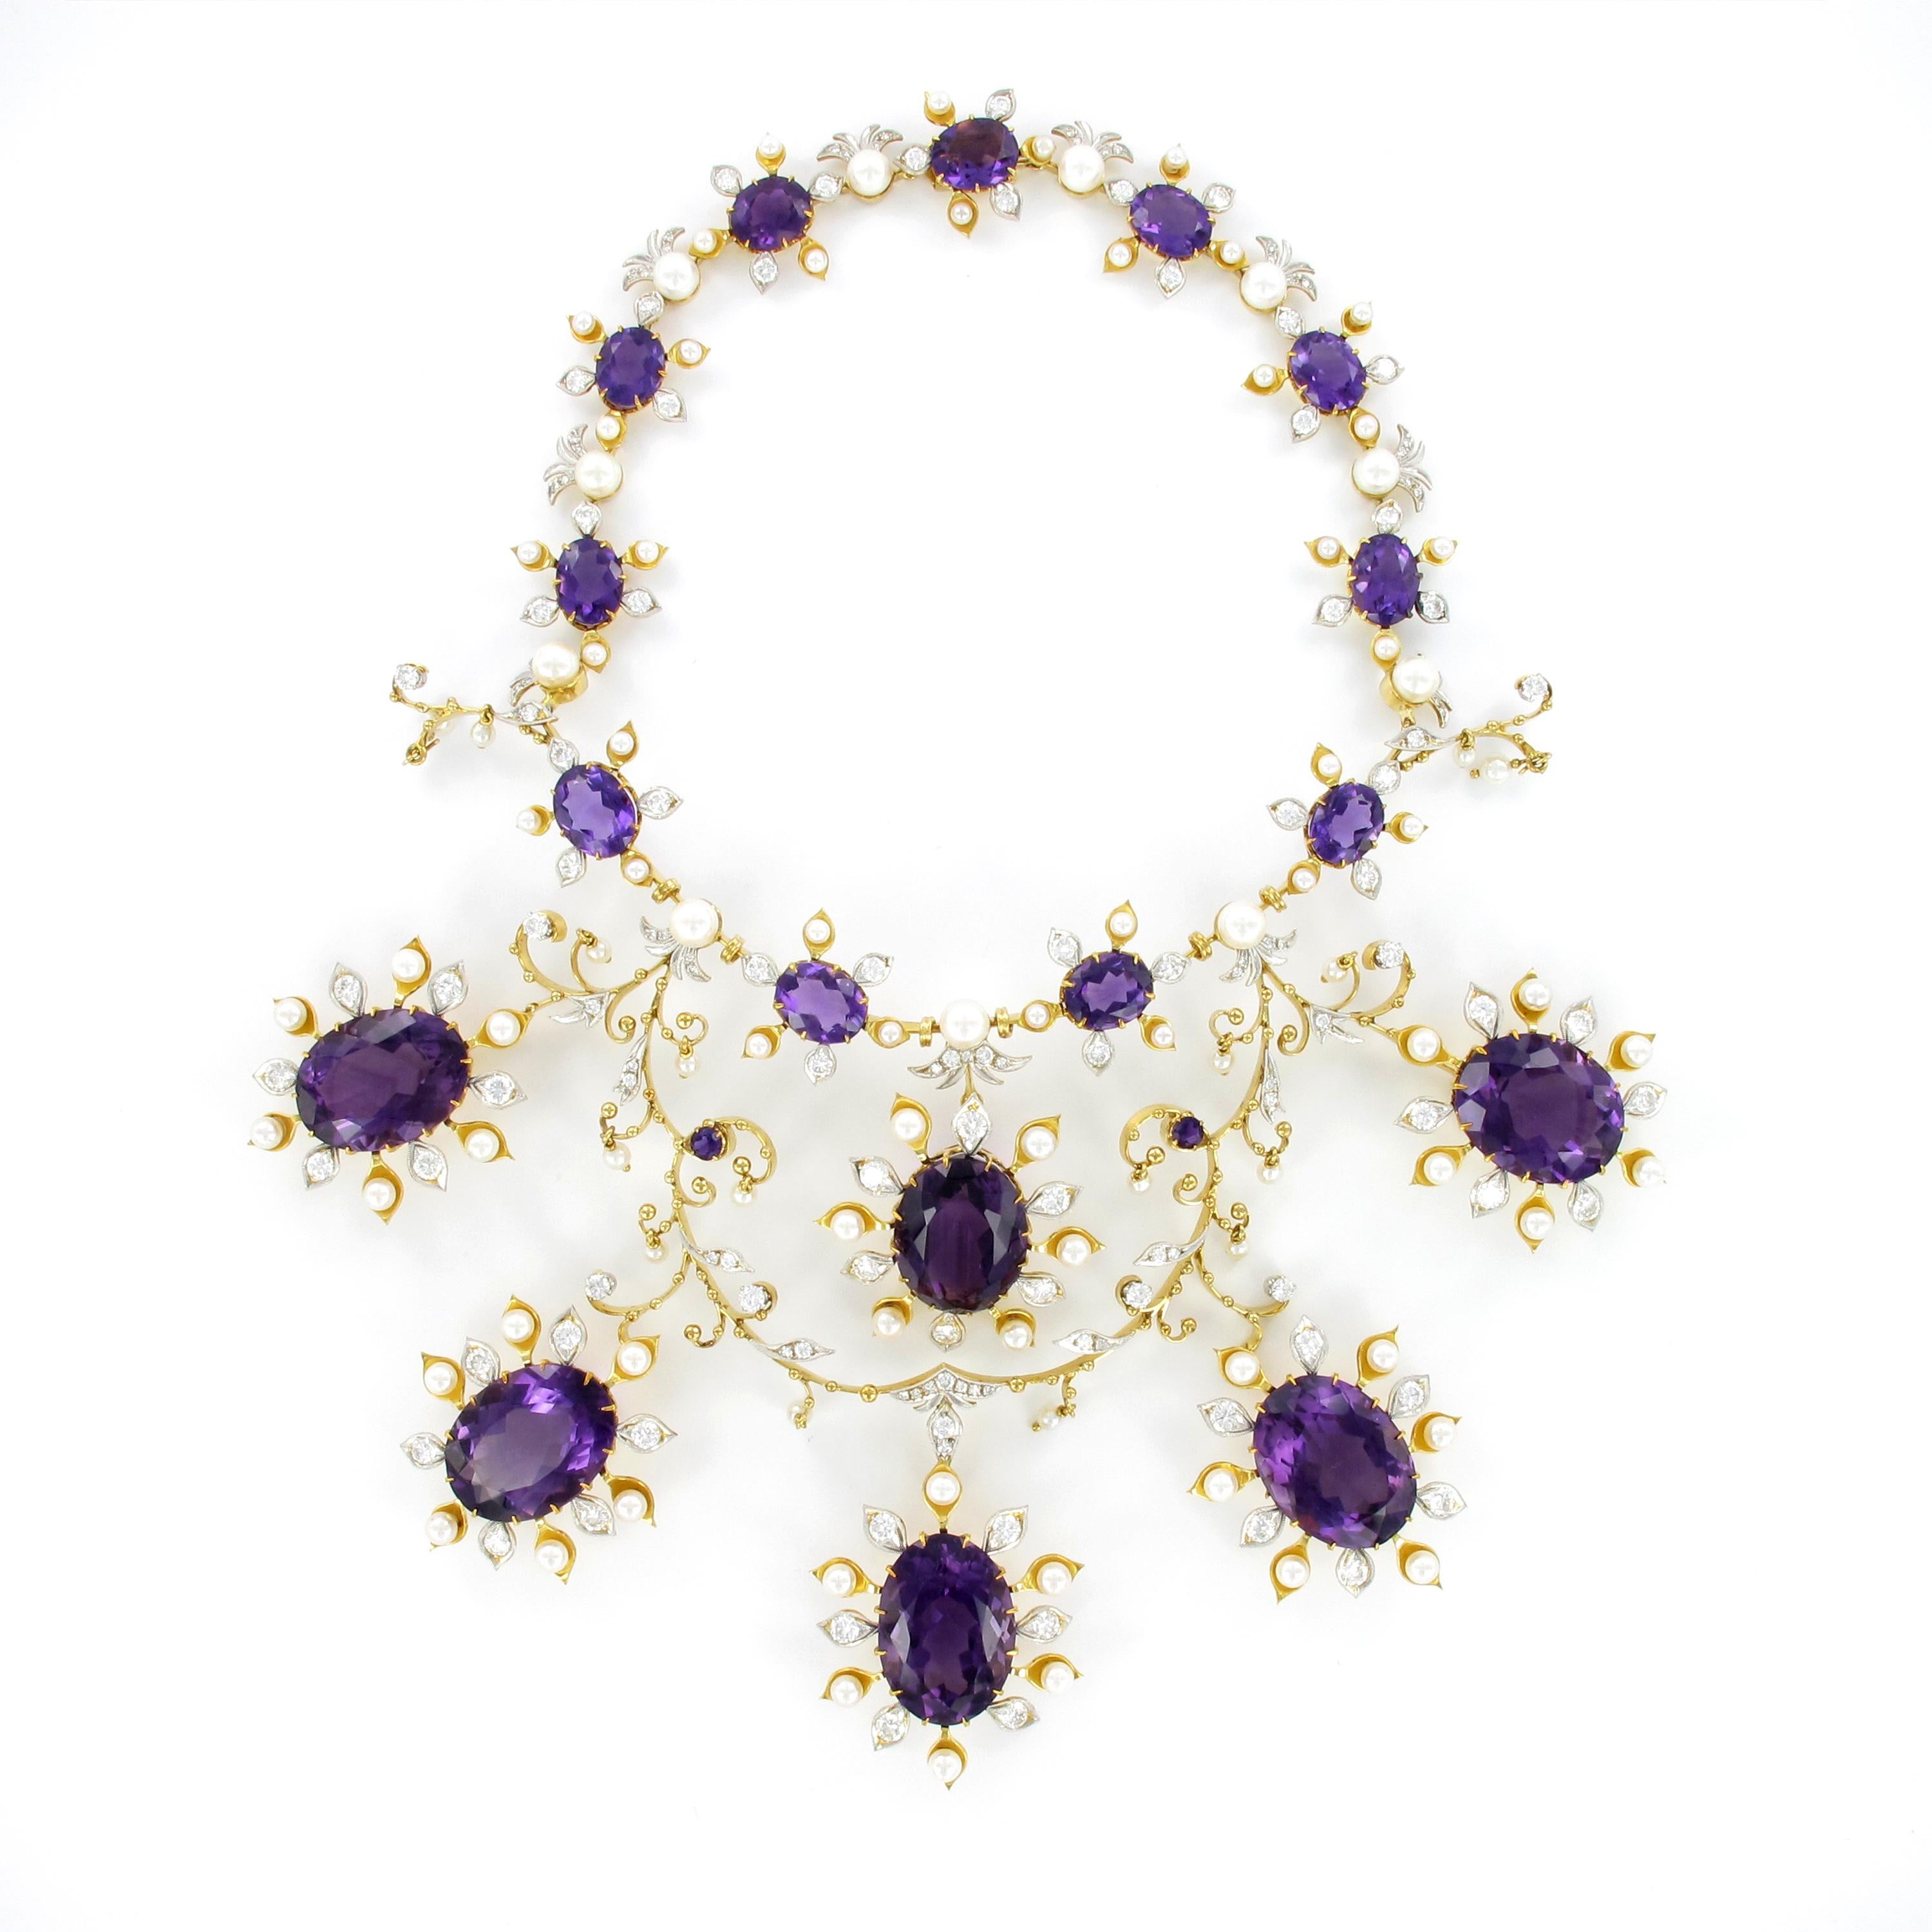 What a show! Spectacular amethyst, diamond and pearl suite consisting of necklace, ear hangers, ring, bangle and brooch. Flowery design in 18 Karat yellow and white gold.

Prong set with a total of 26 oval and round shaped amethysts totaling an